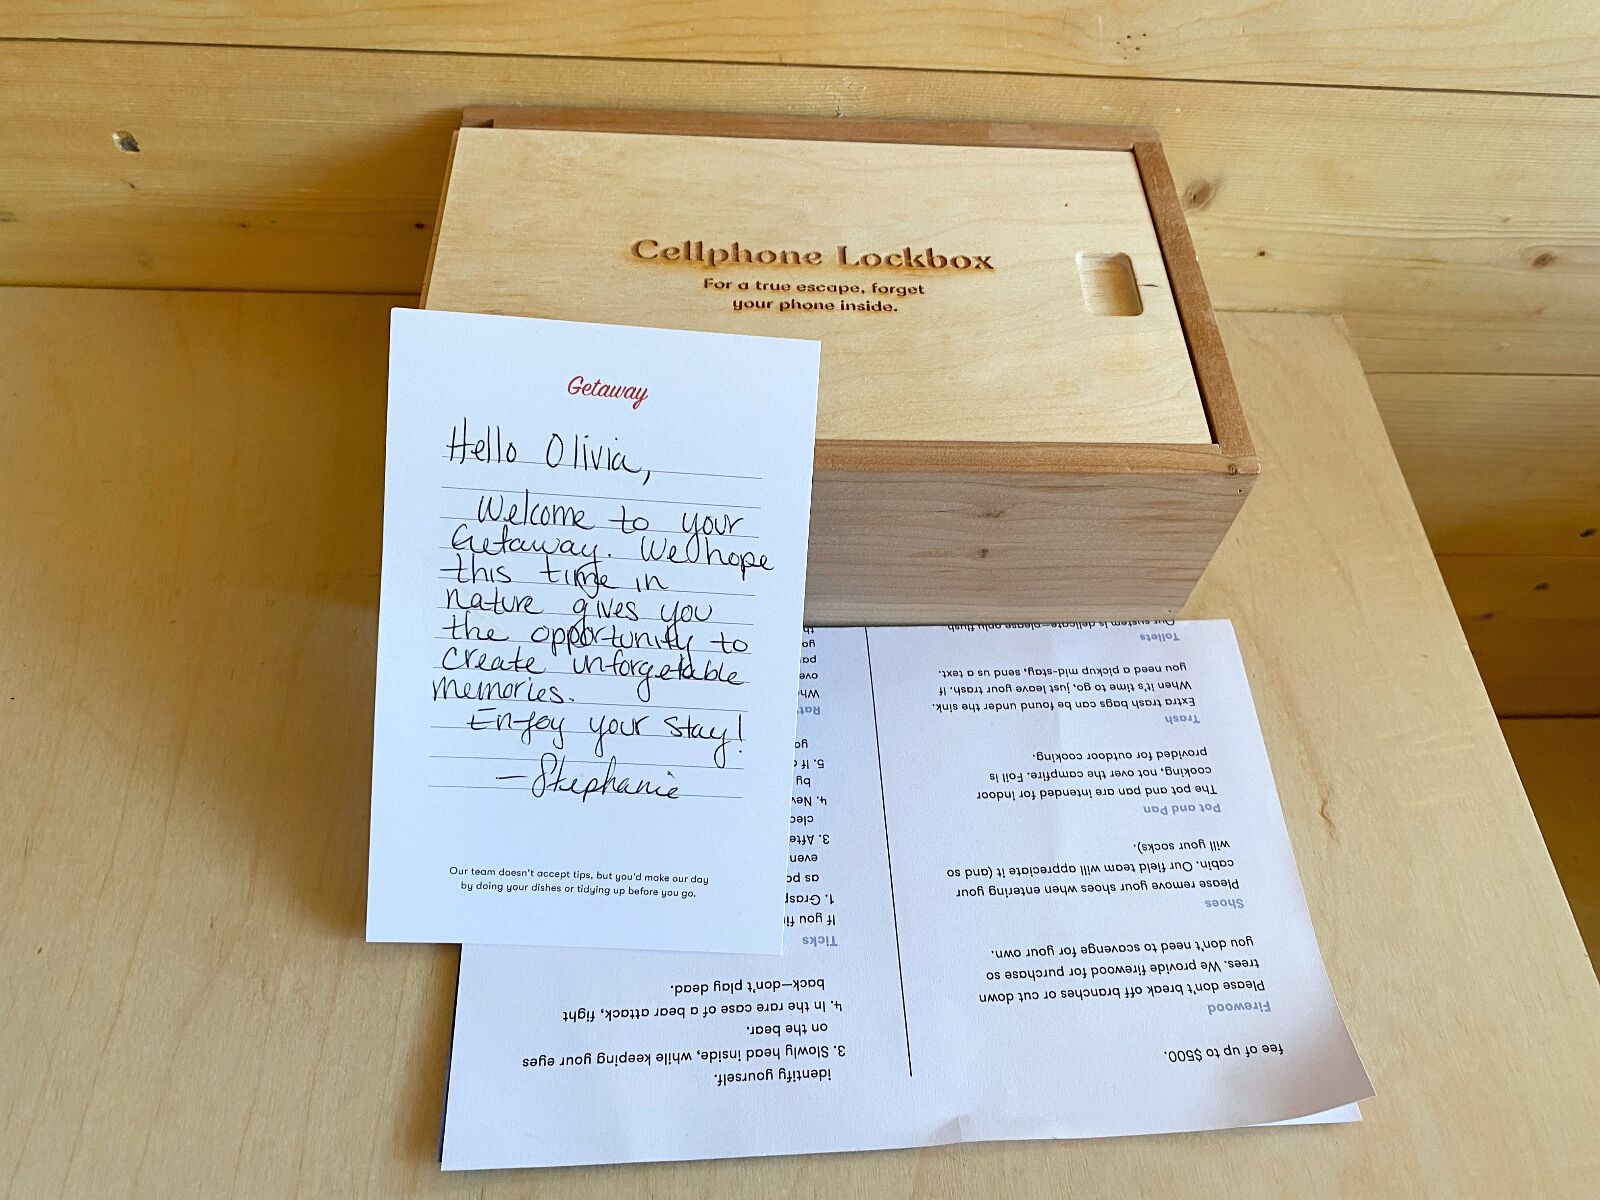 Getaway House, cellphone lockbox with welcome letter